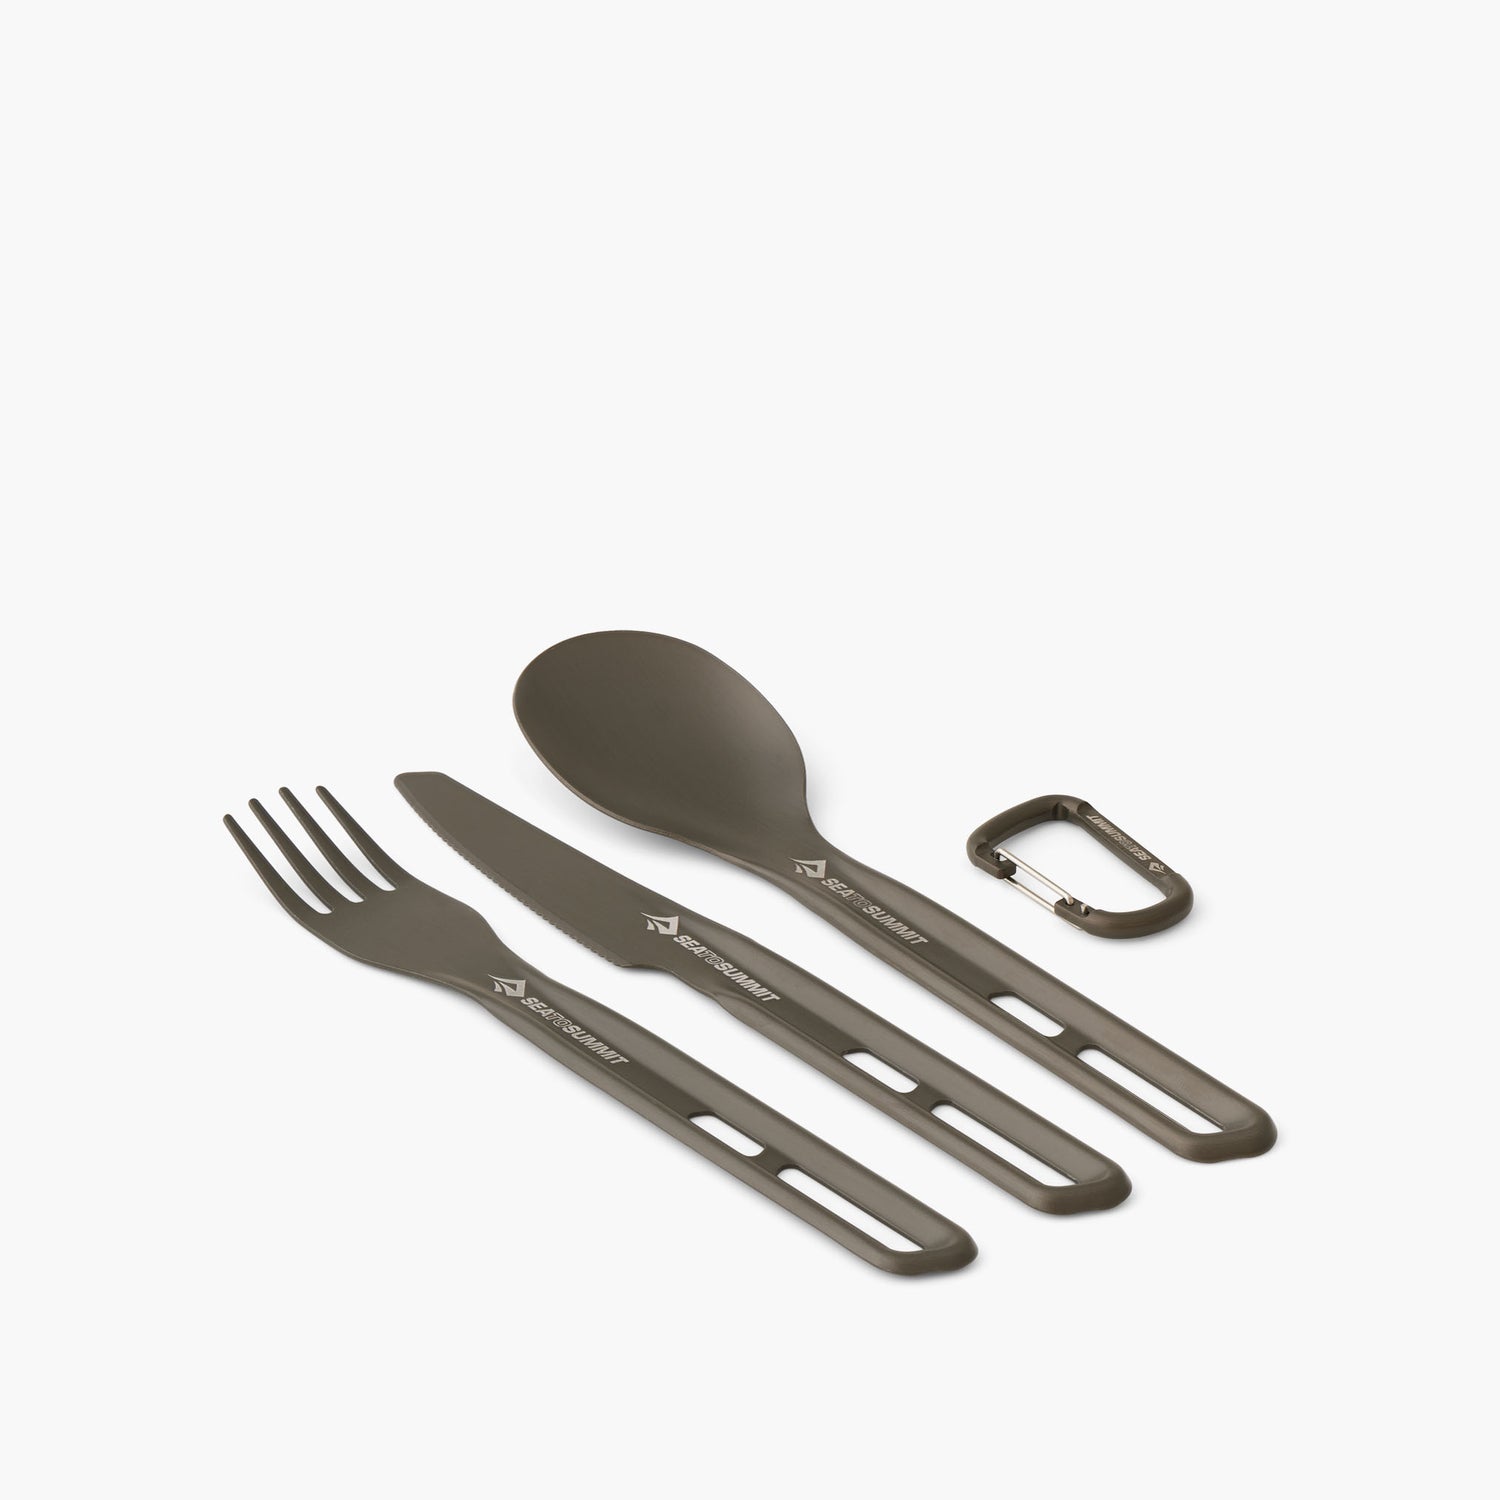 Frontier Ultralight Knife, Fork and Spoon Set